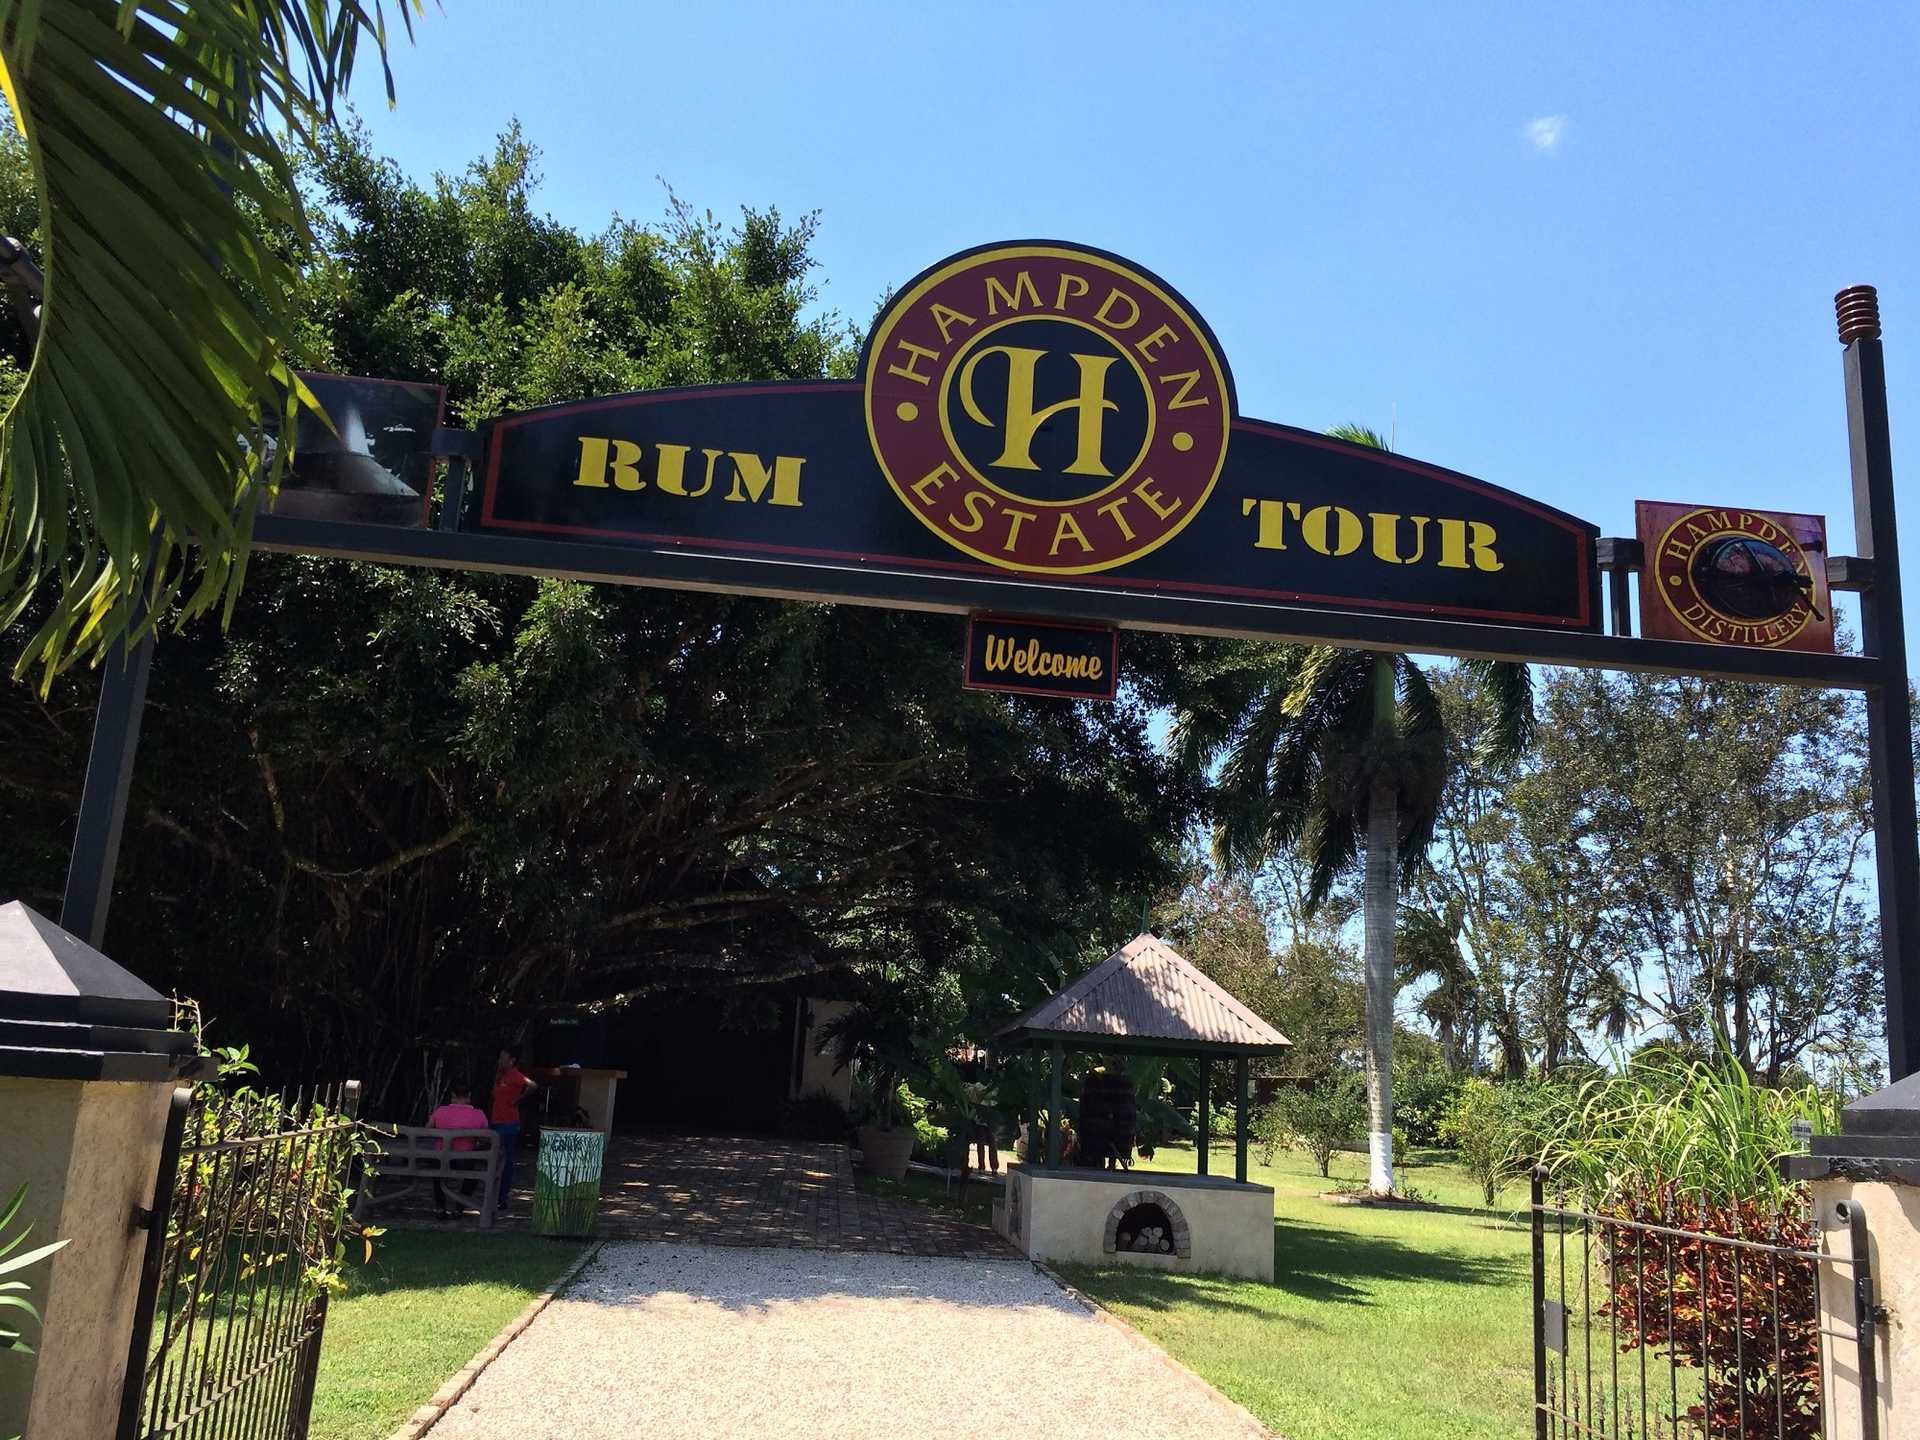 Hampden Estate Rum Tour and Lunch from Kingston